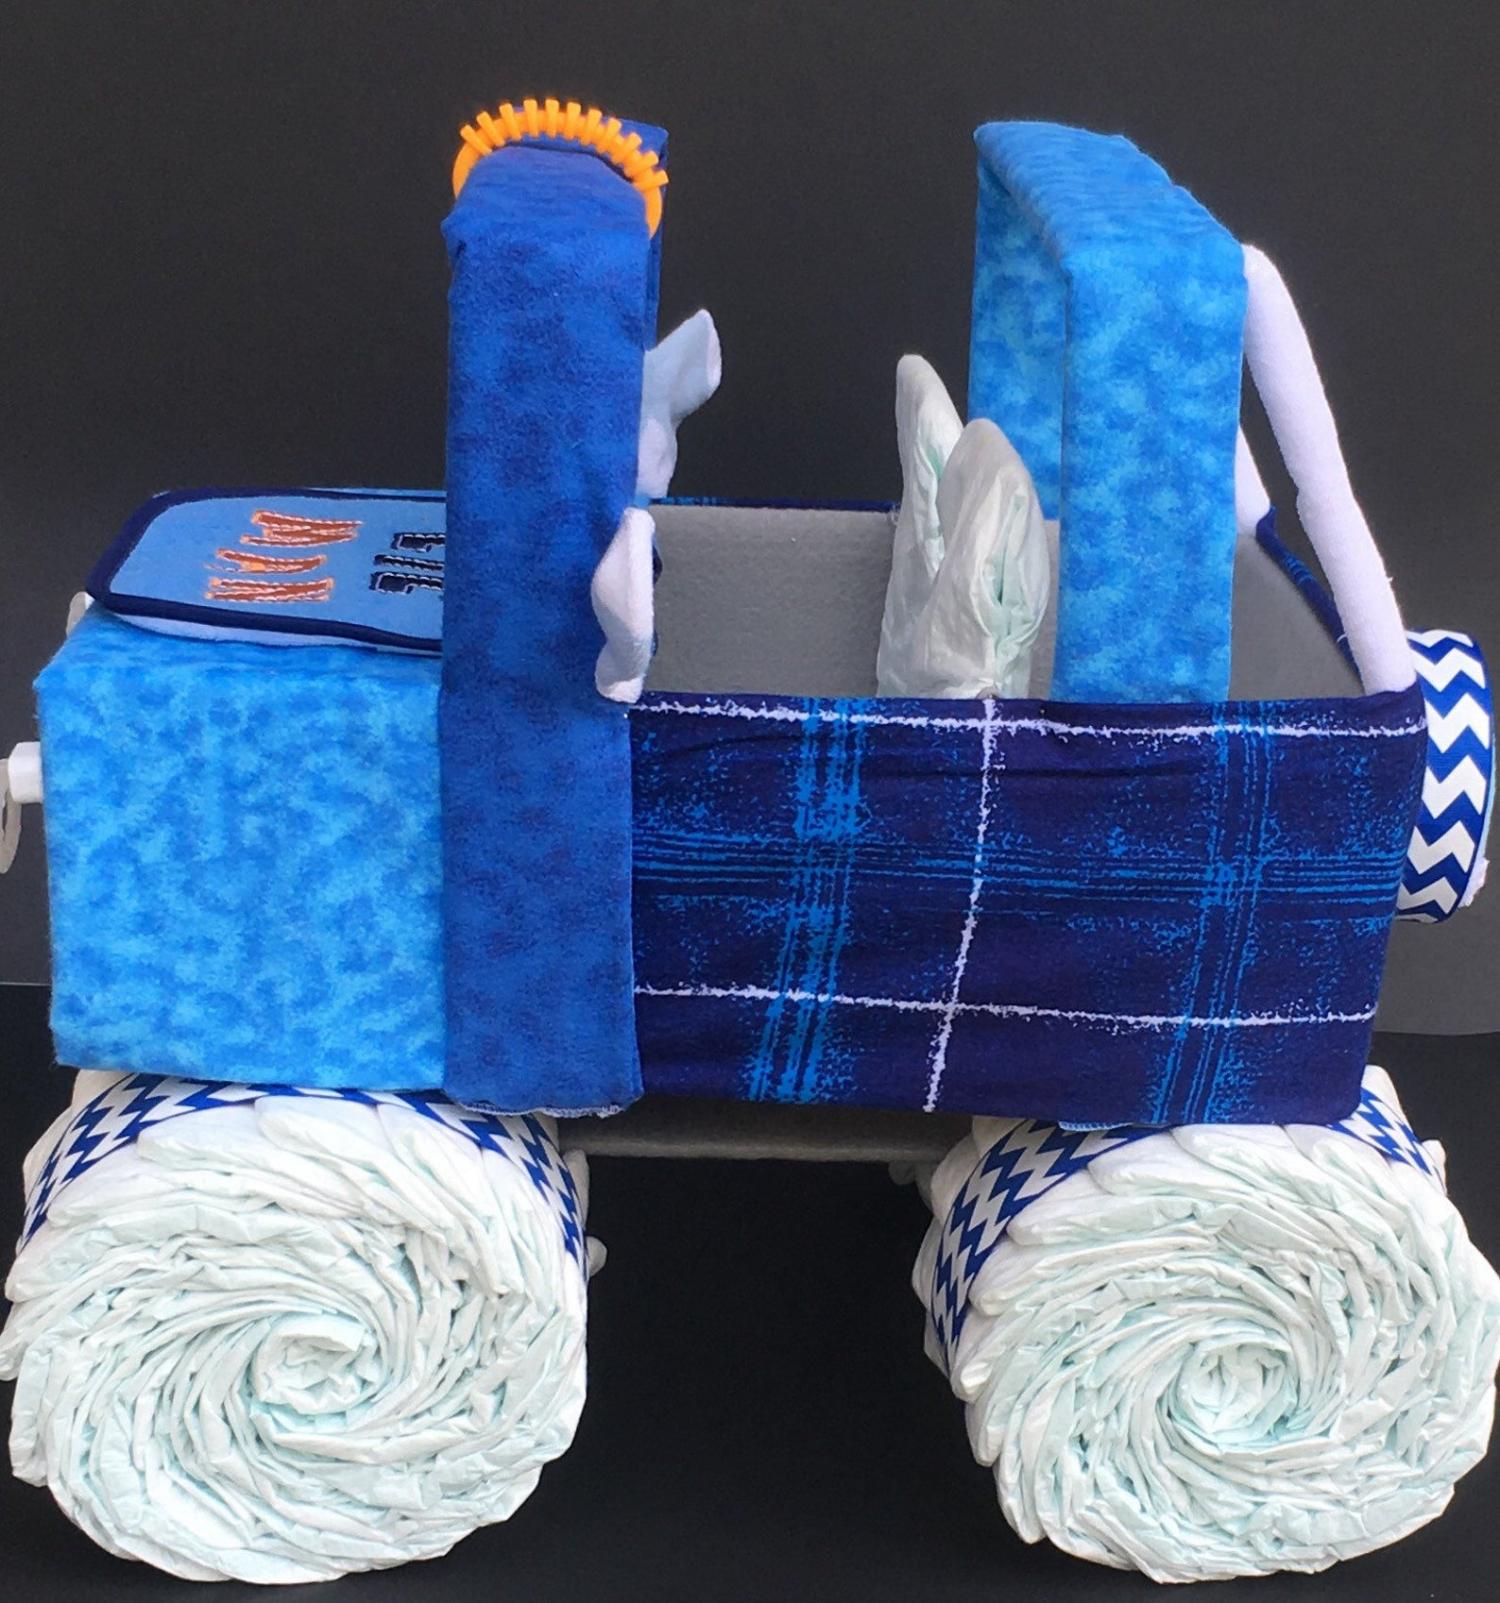 Trucks and Tractors Made From Diapers Make For The Cutest Gift To New Parents - Best baby shower diaper gift idea